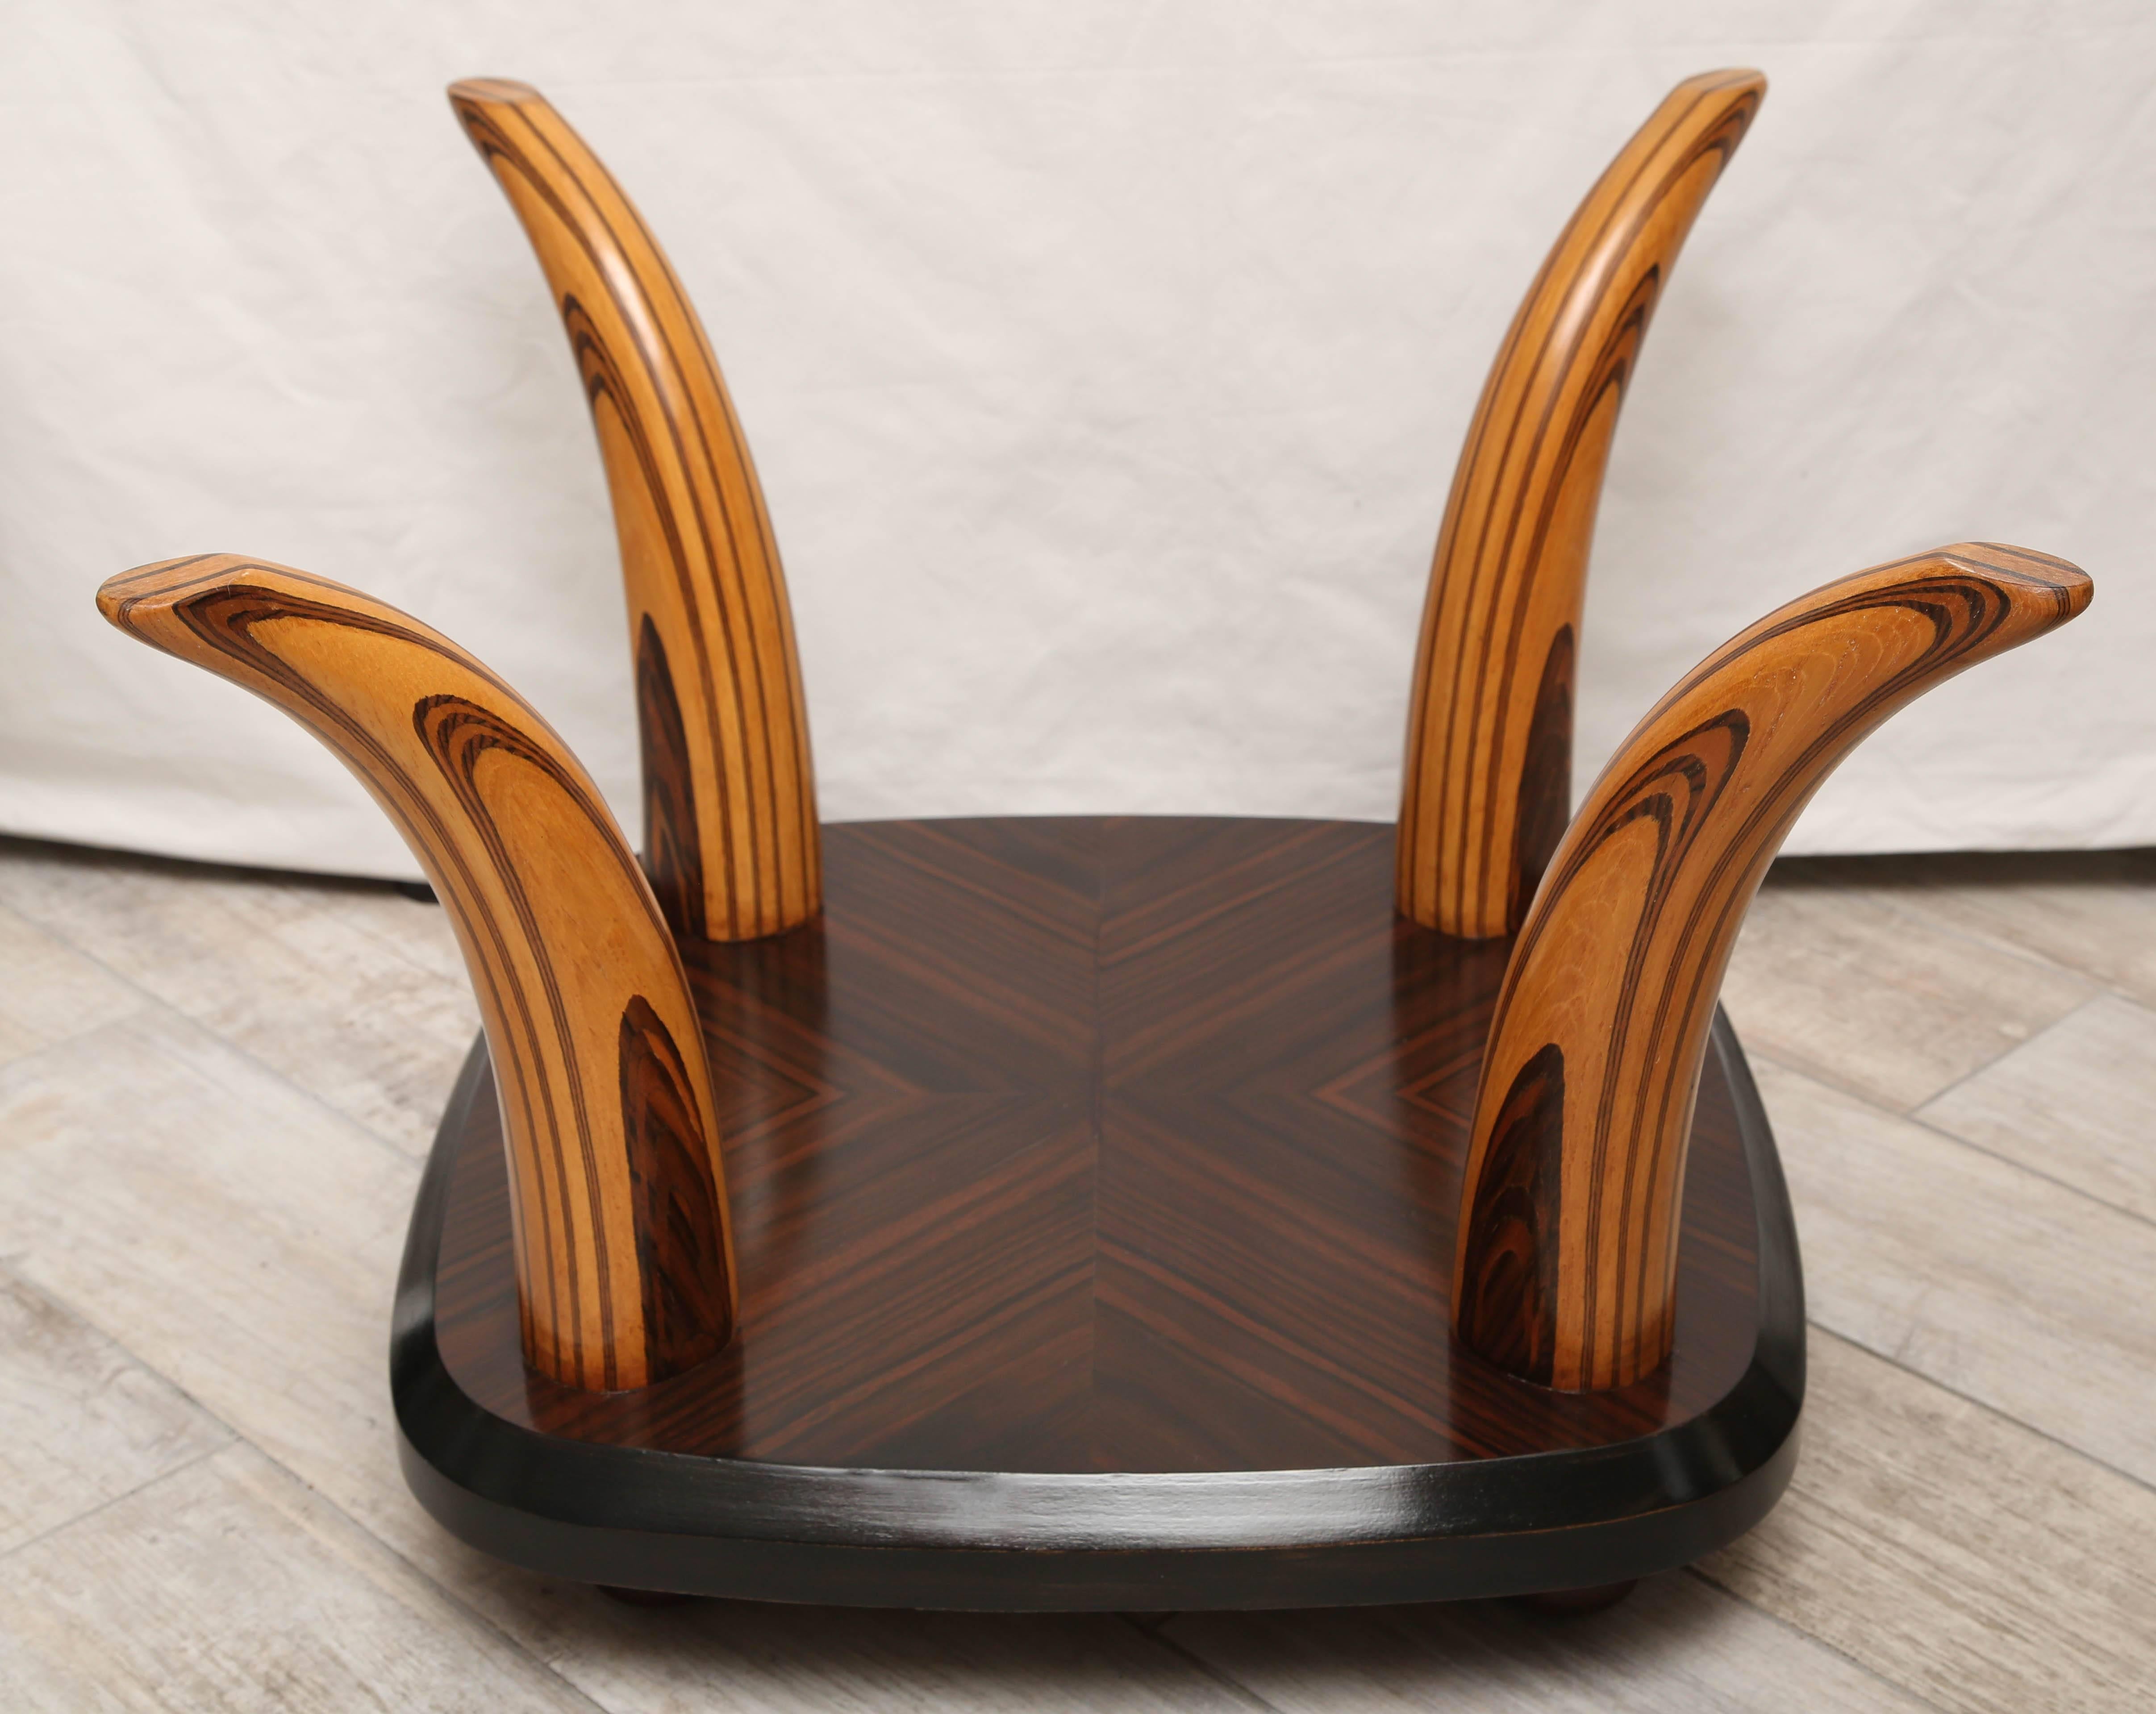 Striking tiger wood coffee table with beveled glass top supported by four wood horns.